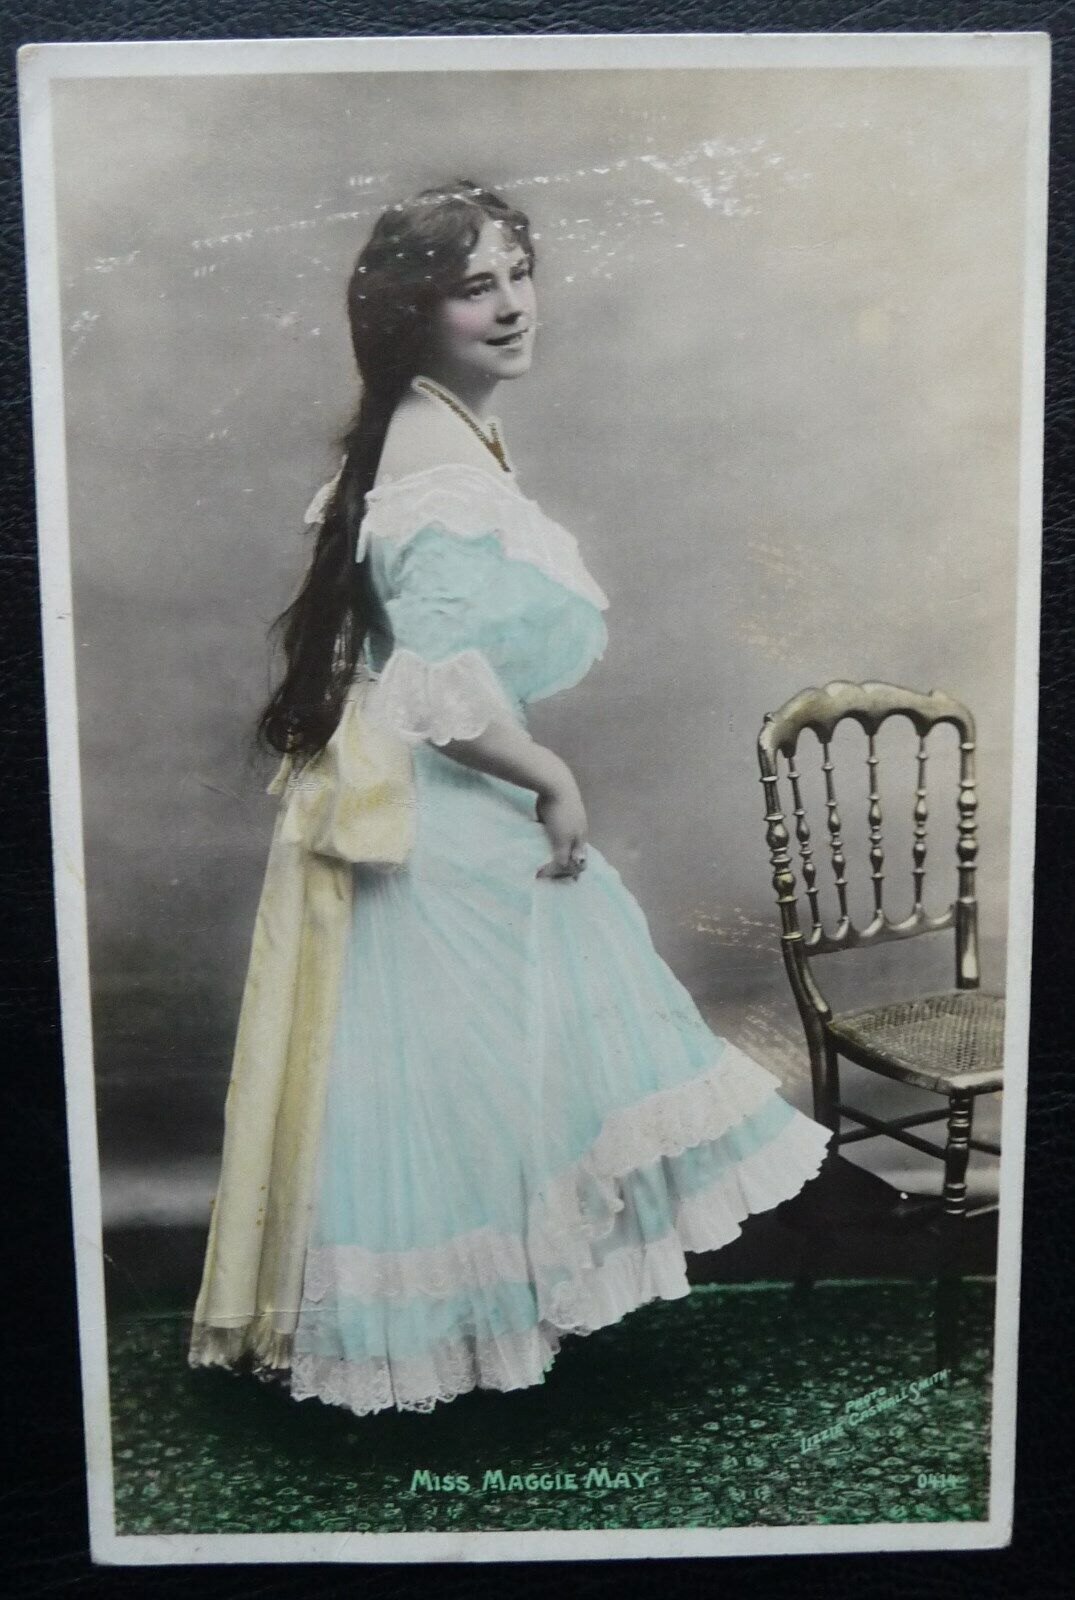 House Clearance - EDWARDIAN ACTRESS MISS MAGGIE MAY POSTCARD POSTED DURHAM 190?